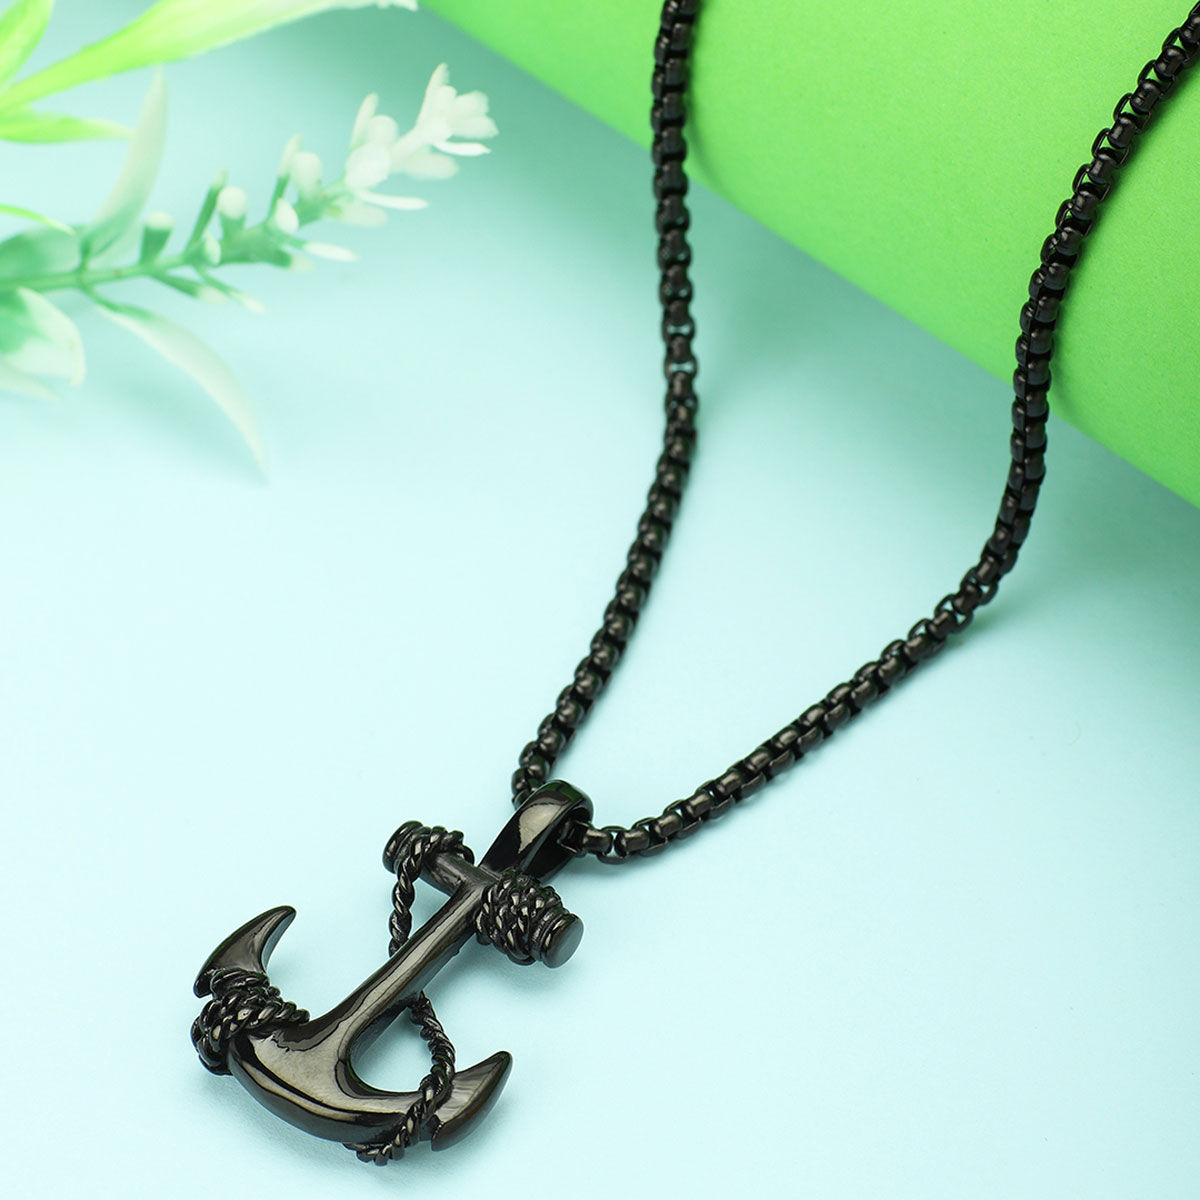 Sailor Anchor Necklace | Anchor necklace, Stainless steel pendant, Anchor  pendant necklace